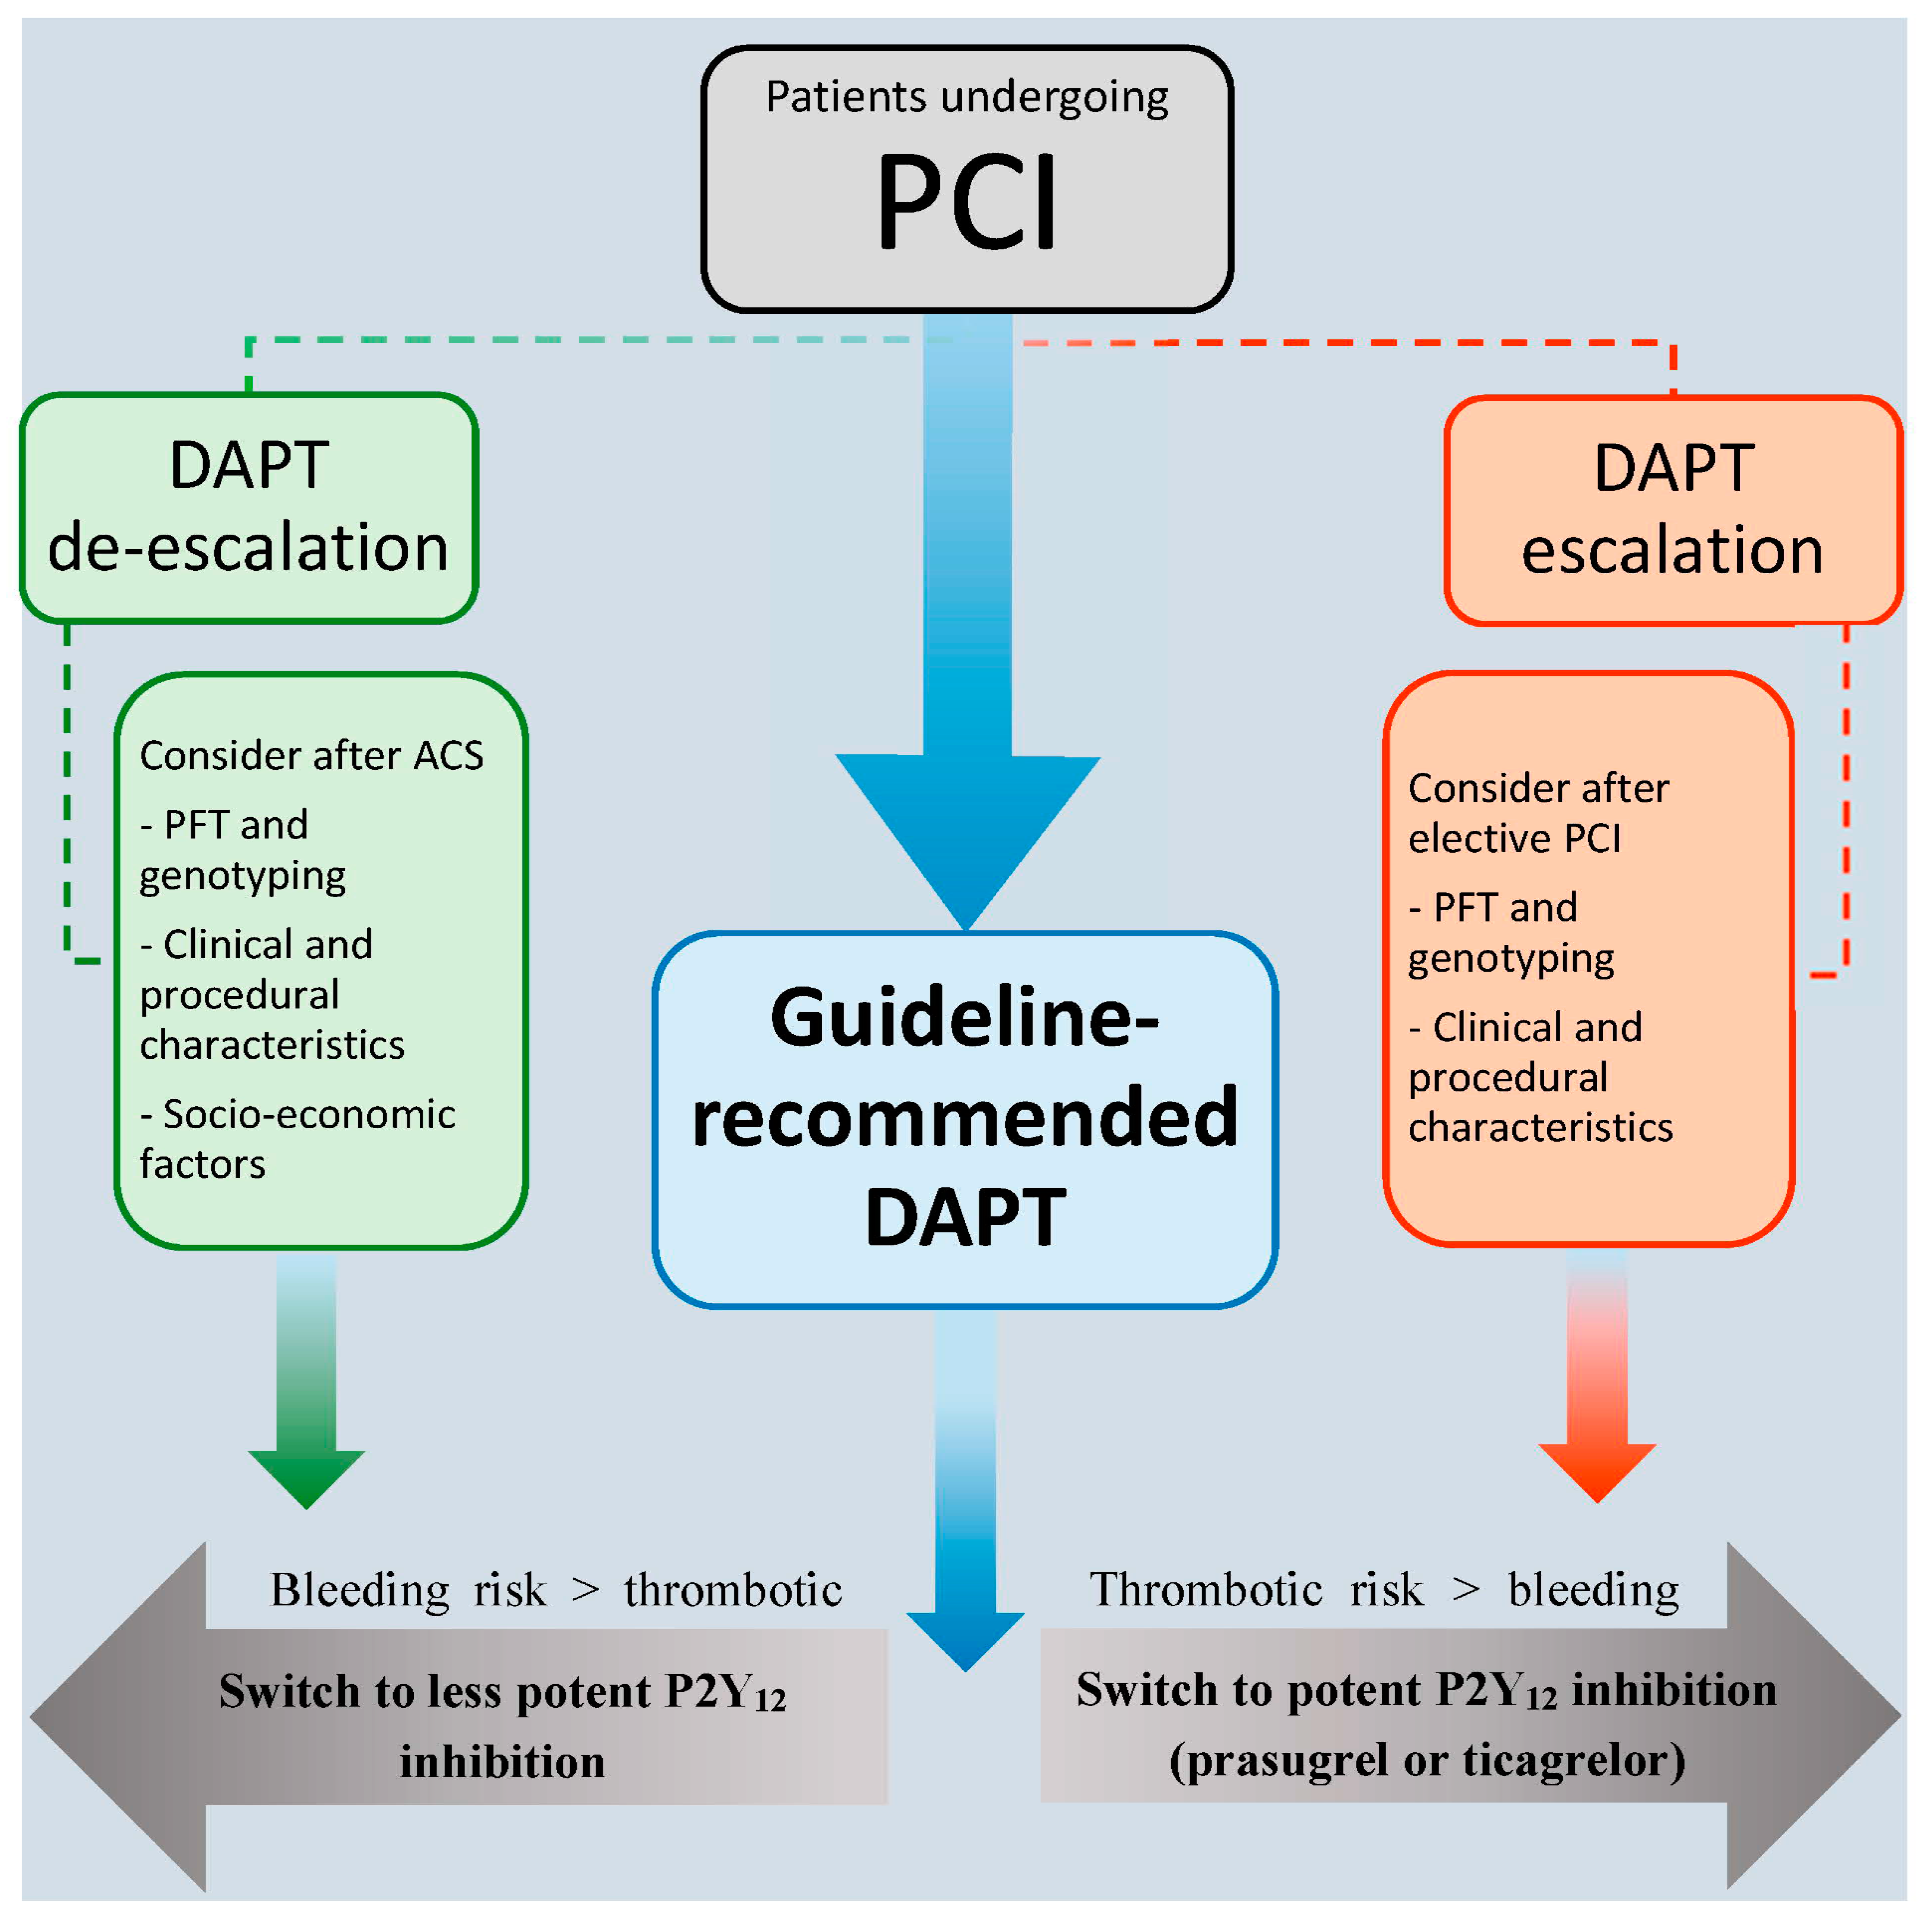 JCM | Free Full-Text | De-Escalation of Antiplatelet Treatment in Patients  with Myocardial Infarction Who Underwent Percutaneous Coronary  Intervention: A Review of the Current Literature